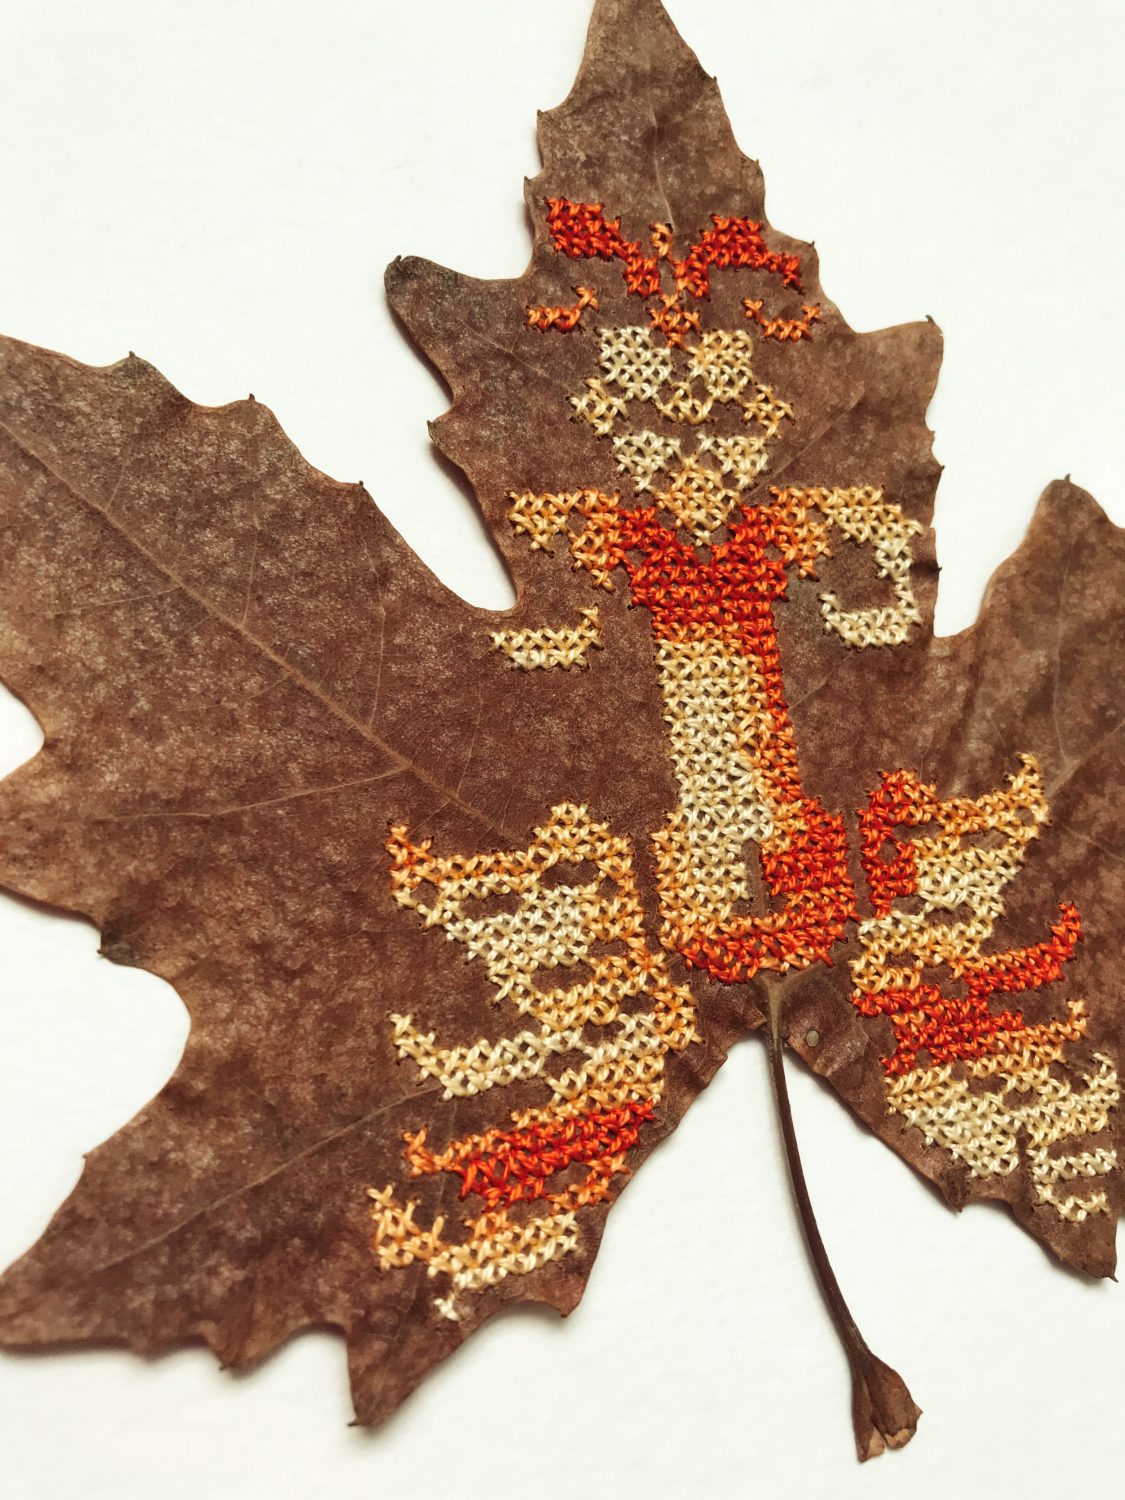 Red, yellow and orange cross-stitch, stitched into dried leaves